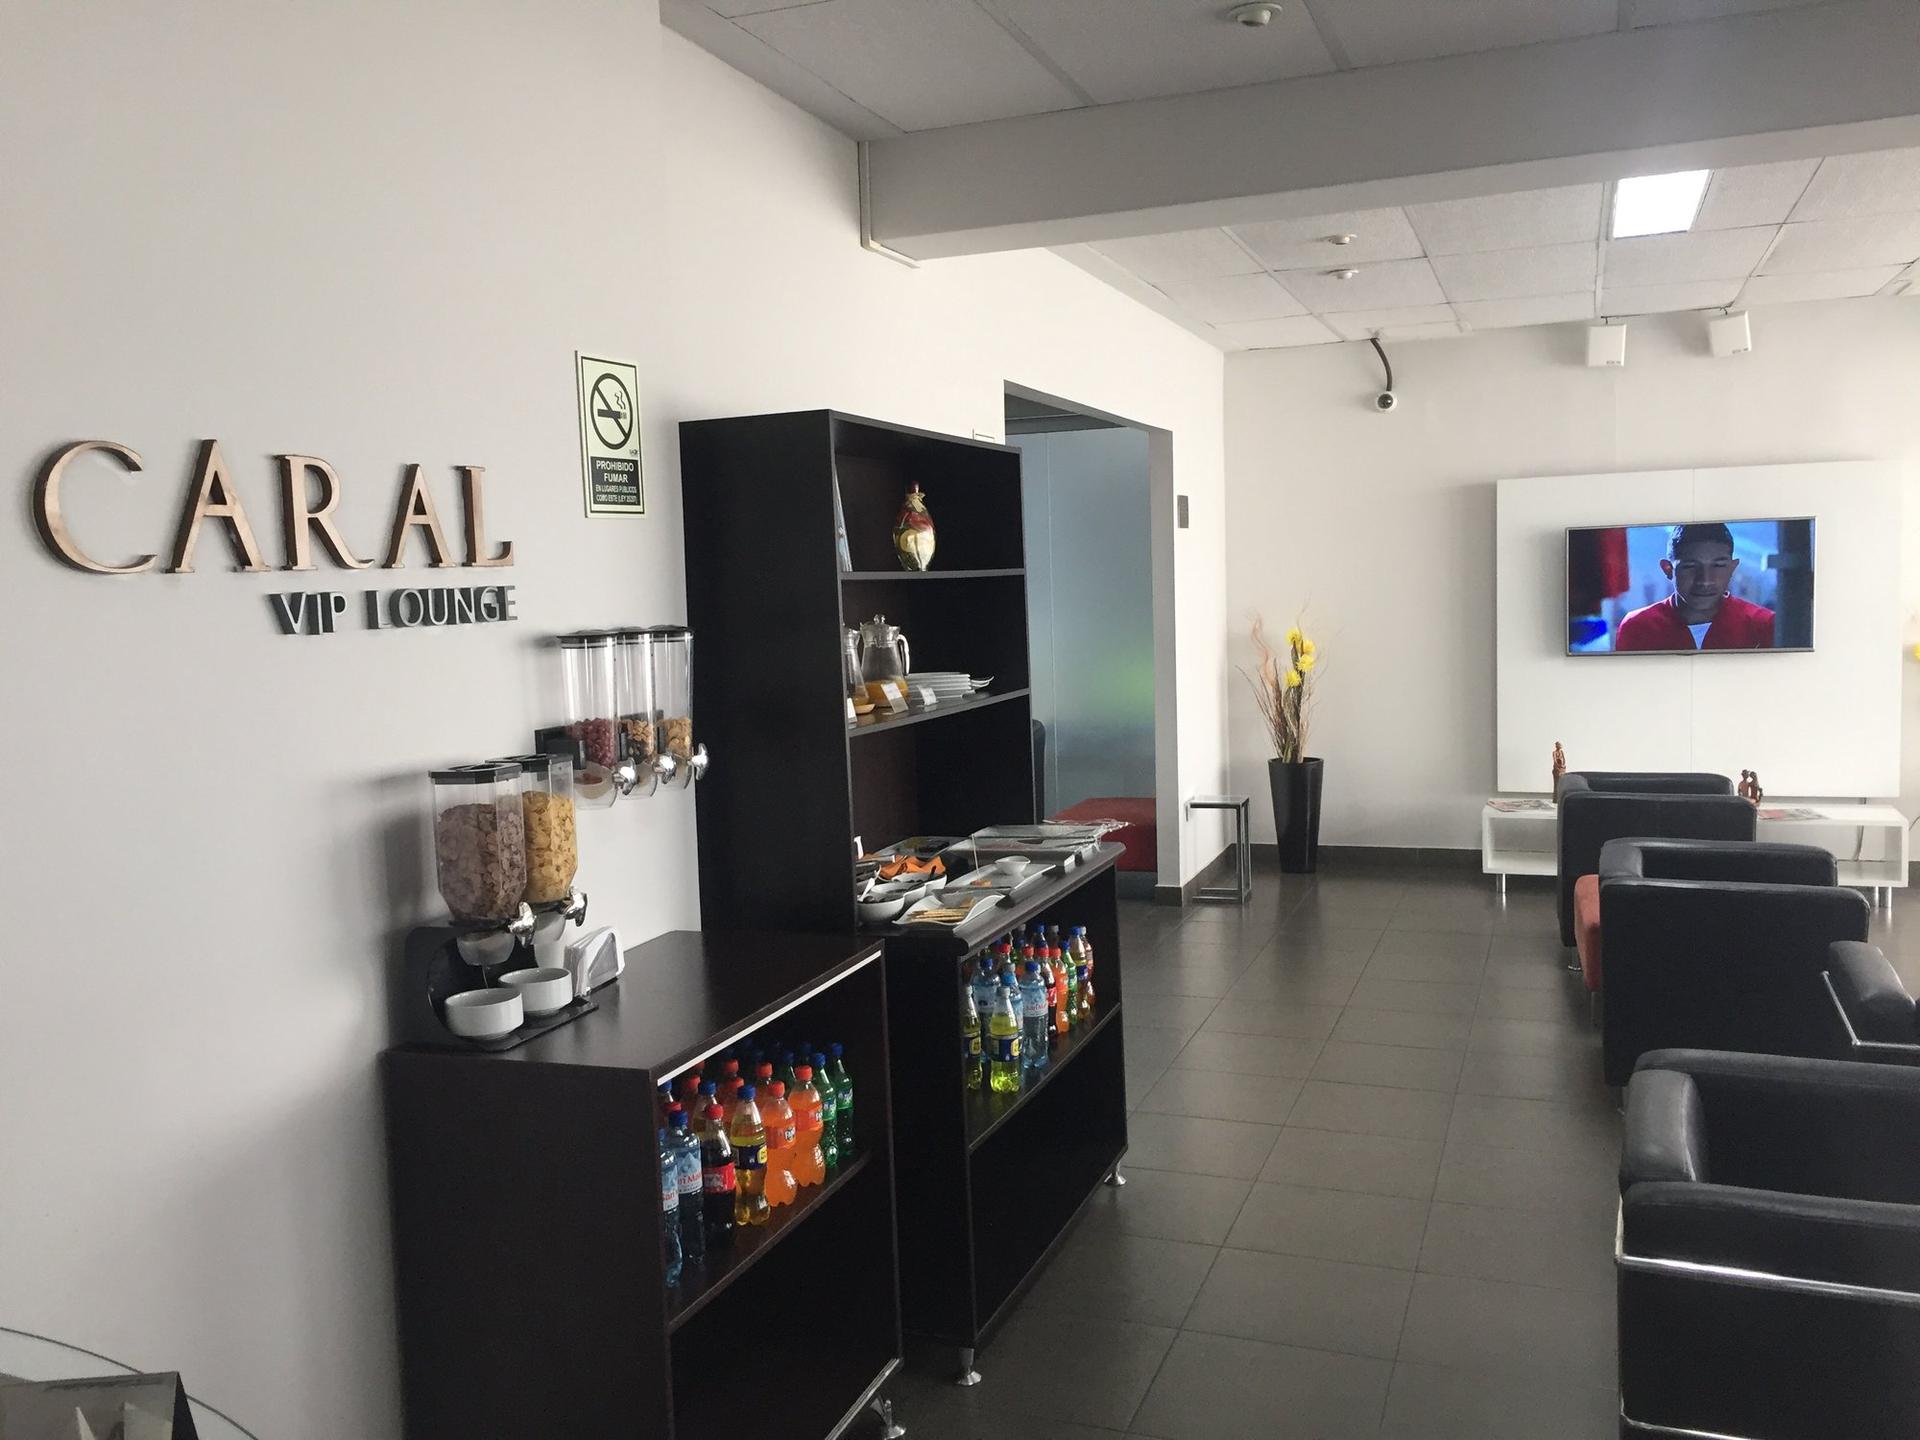 Caral VIP Lounge image 1 of 3